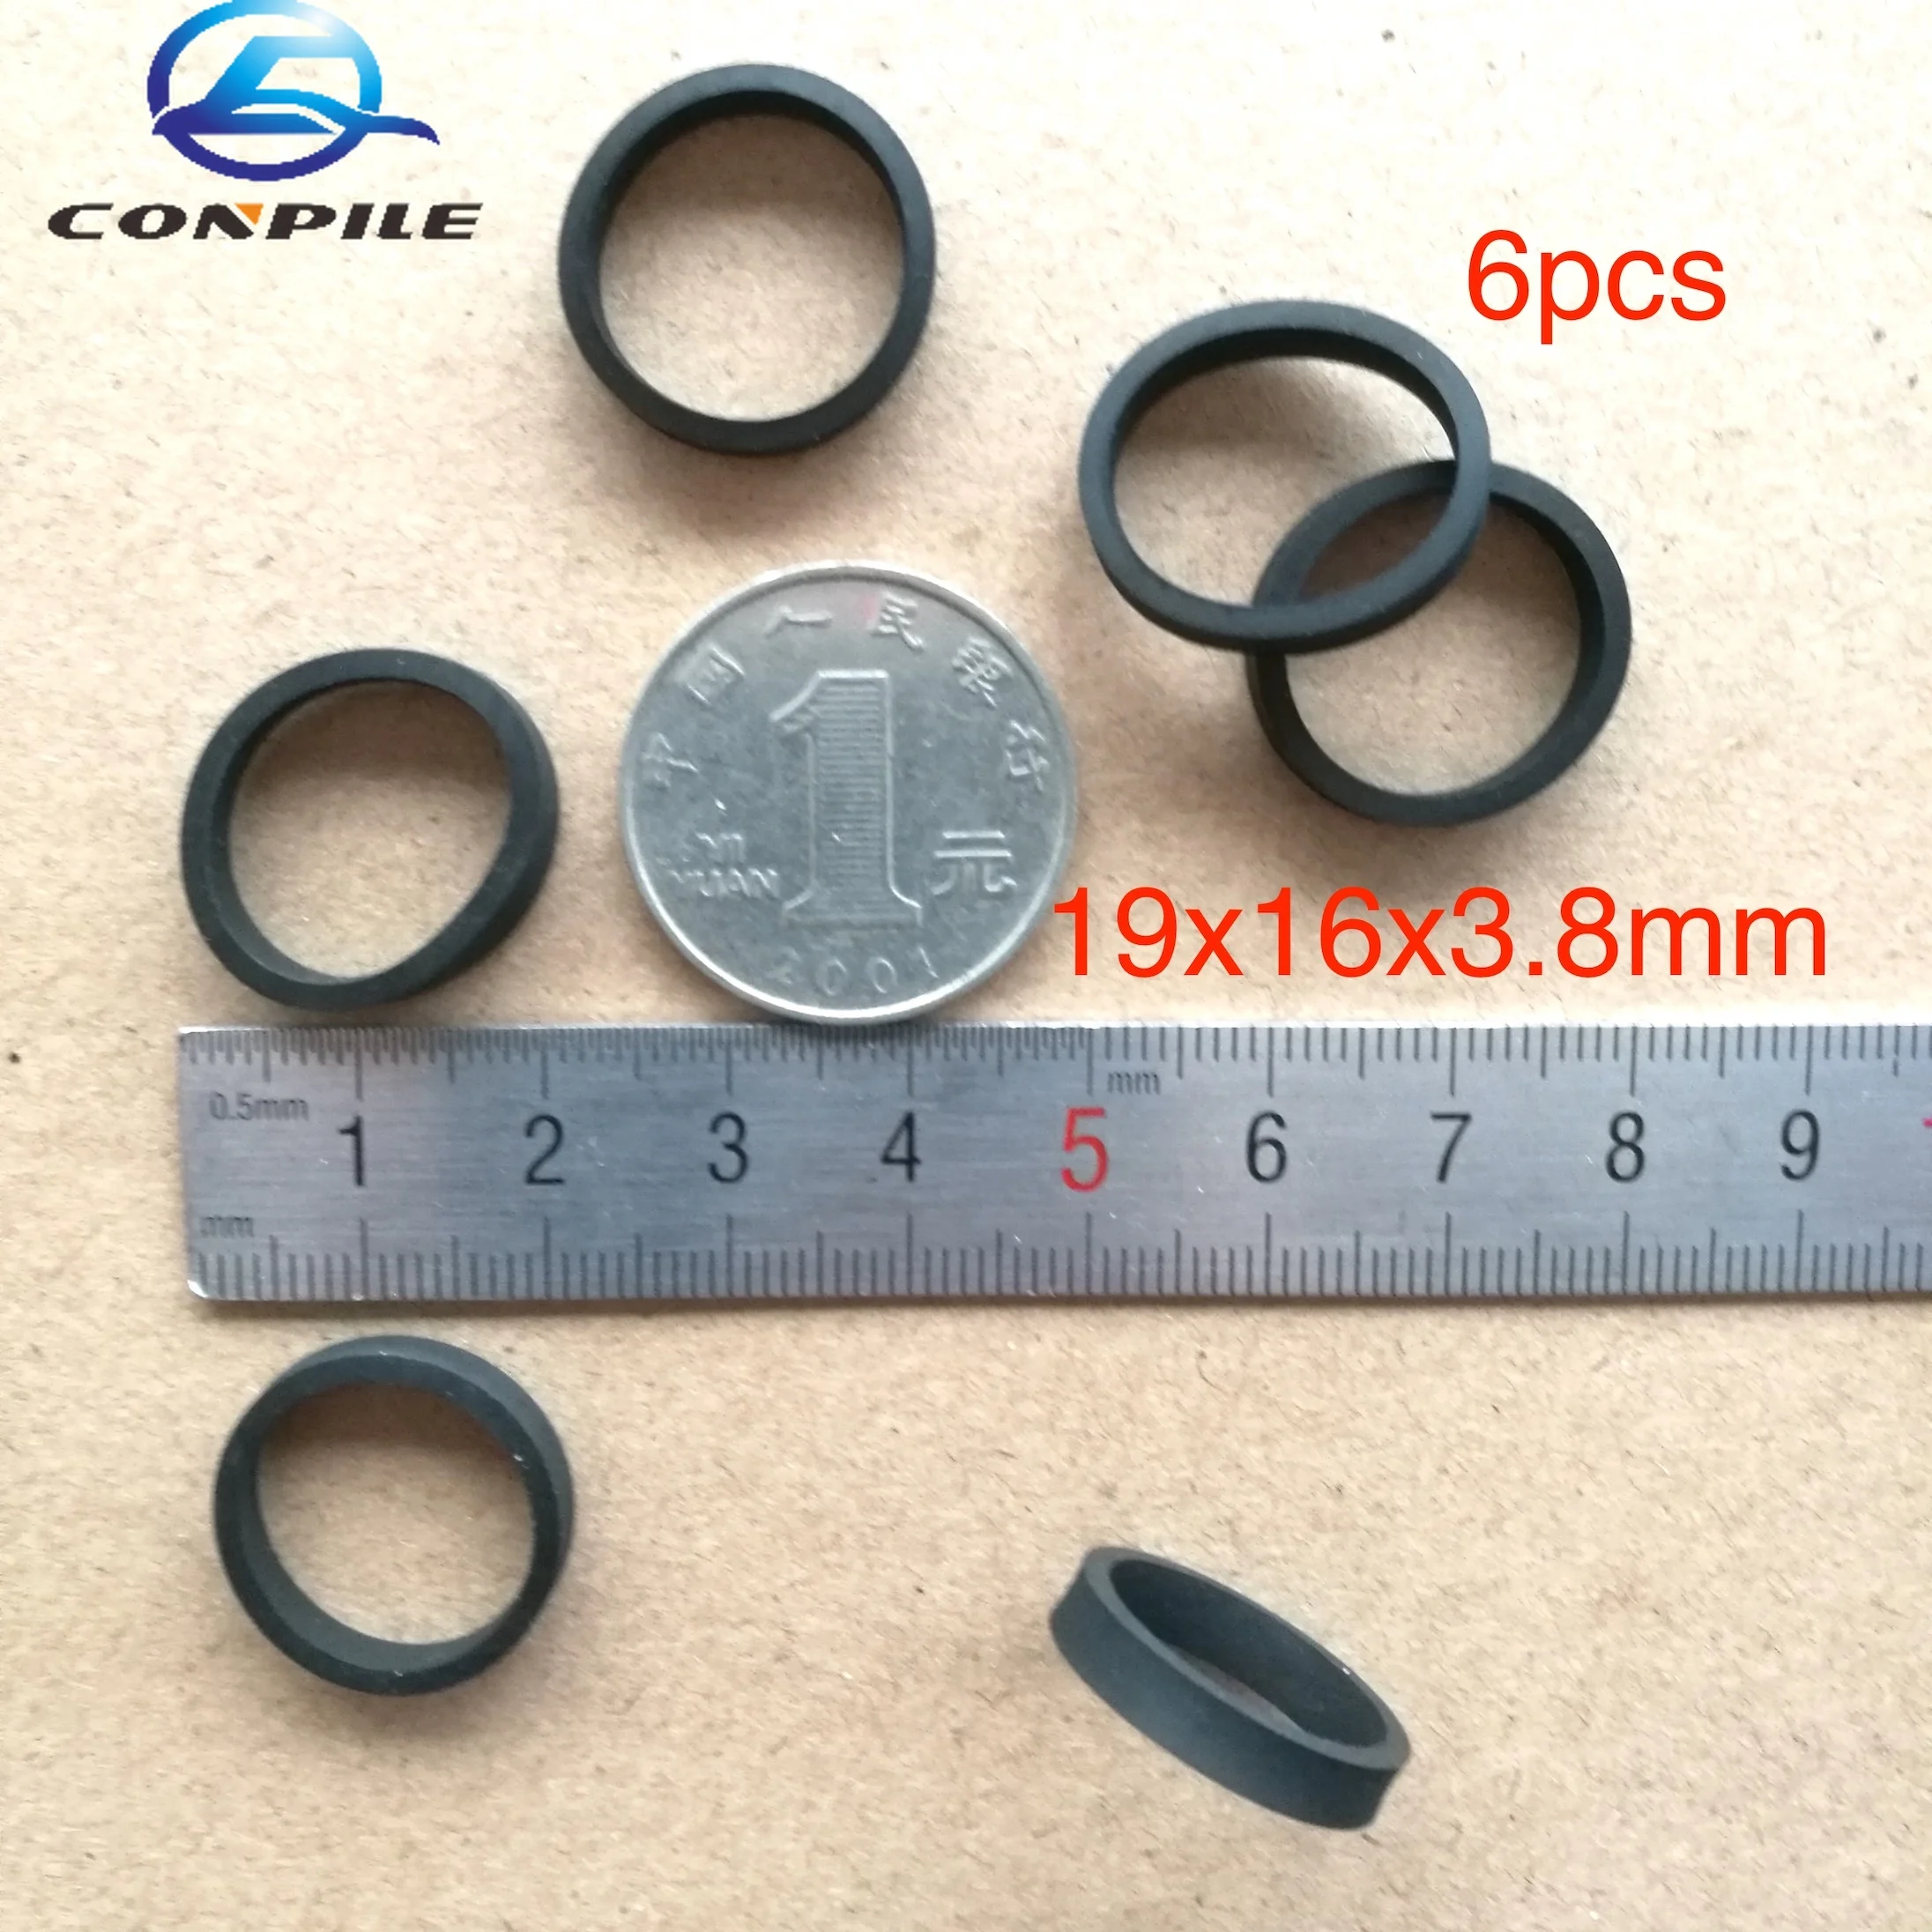 

6pcs 19*16*3.8mm wheel shock absorber for belt pulley cassette deck audio tape recorder pinch roller Stereo player